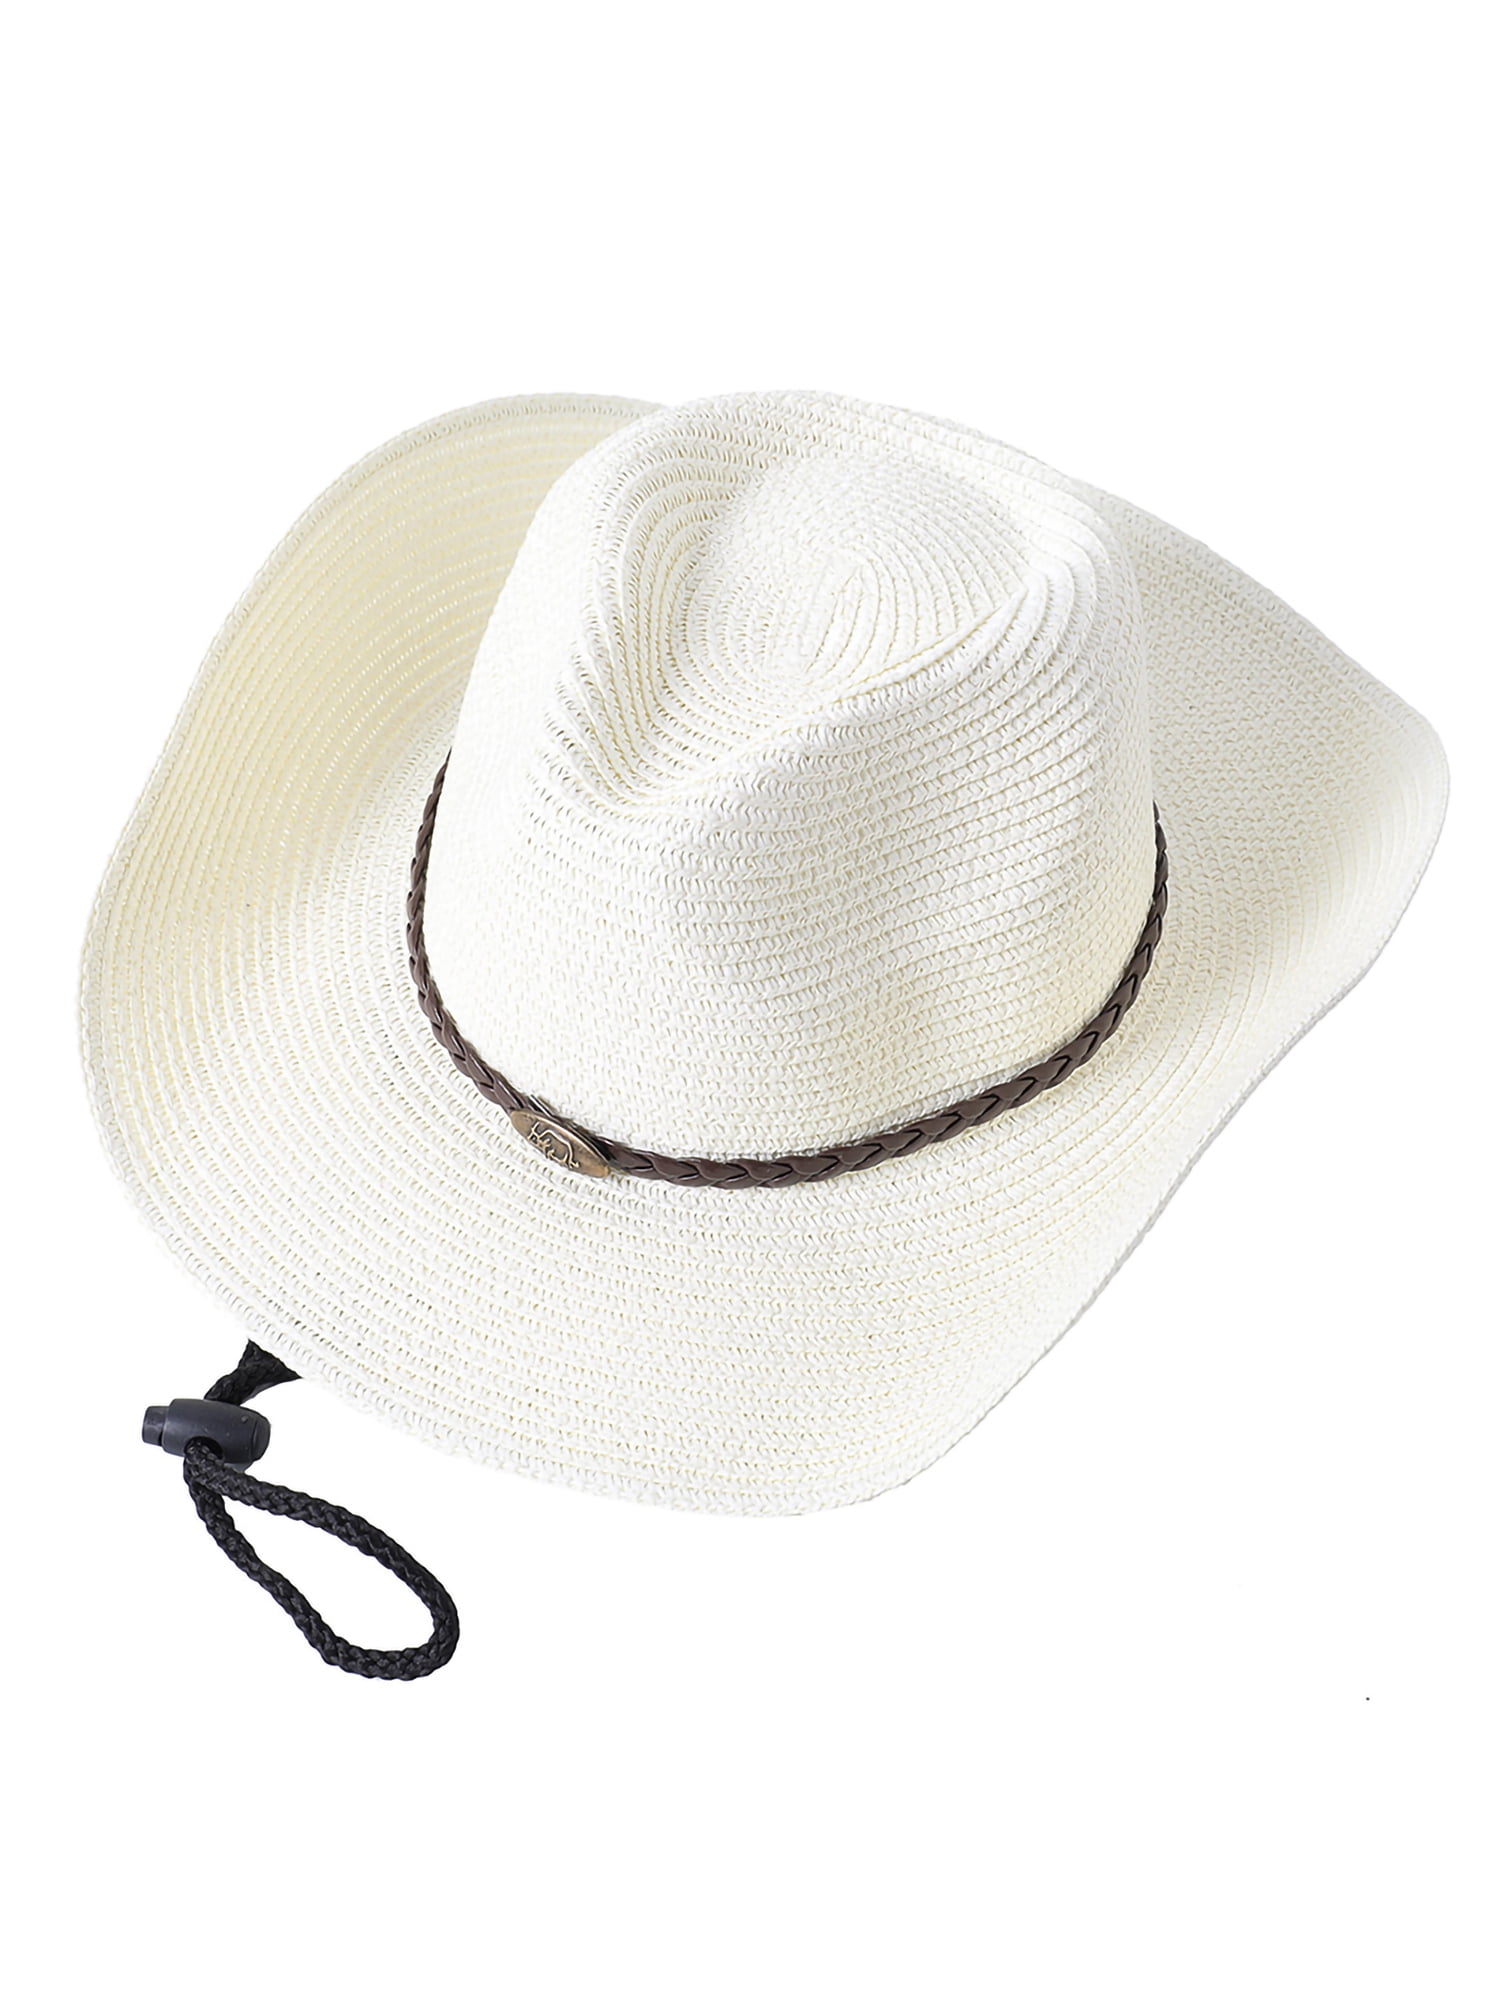 Western Cowboy Hat with String for Women Men Foldable Summer Sun Protection Straw  Beach Hats with Wide Brim 